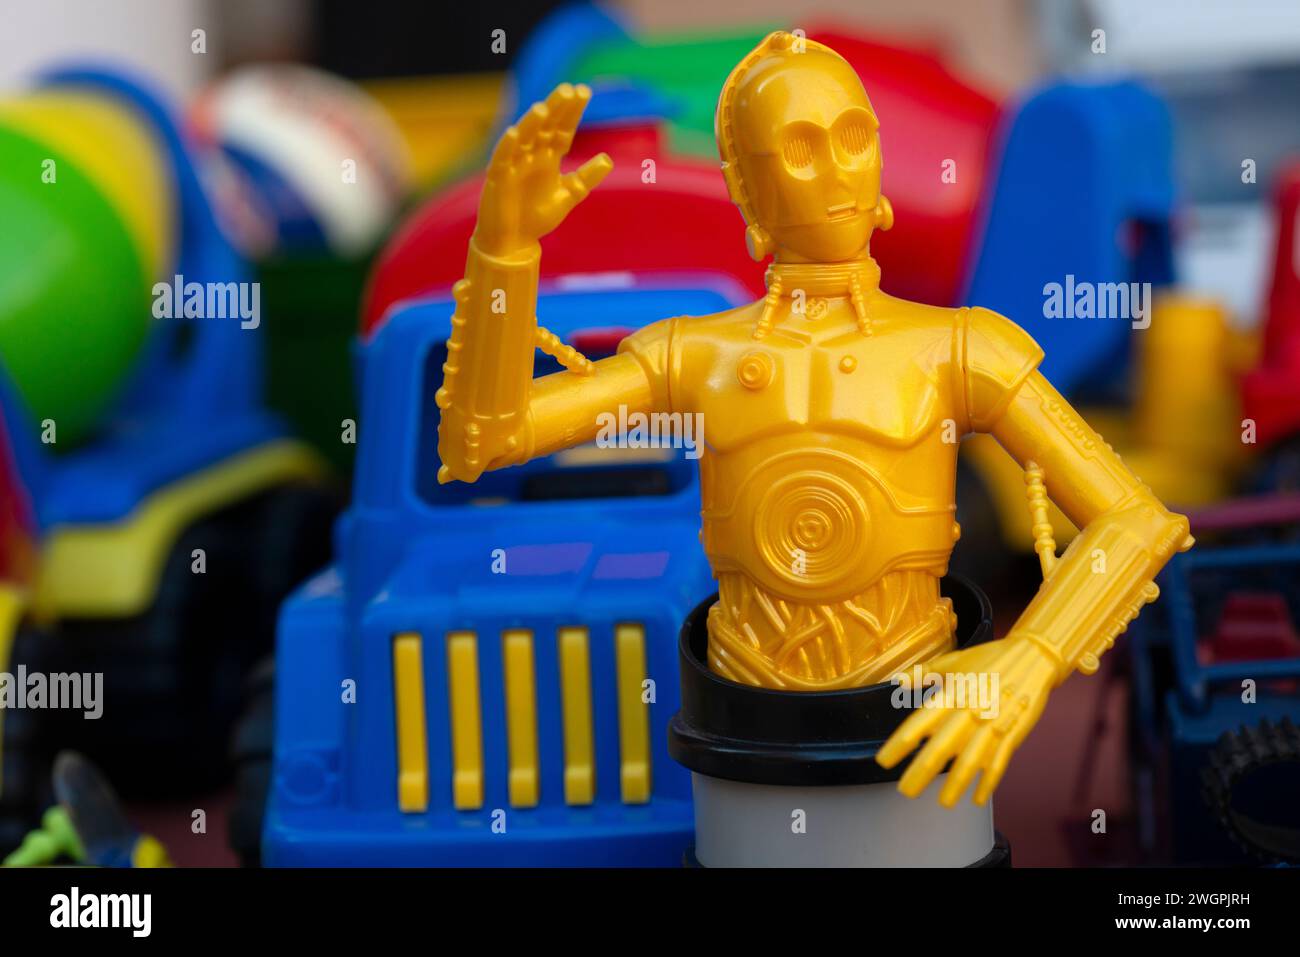 Italy, Lombardy, Flea Market, Kinder Maxi Great Surprise Easter Egg for the Year 2022 Star Wars C-3PO Toy Stock Photo